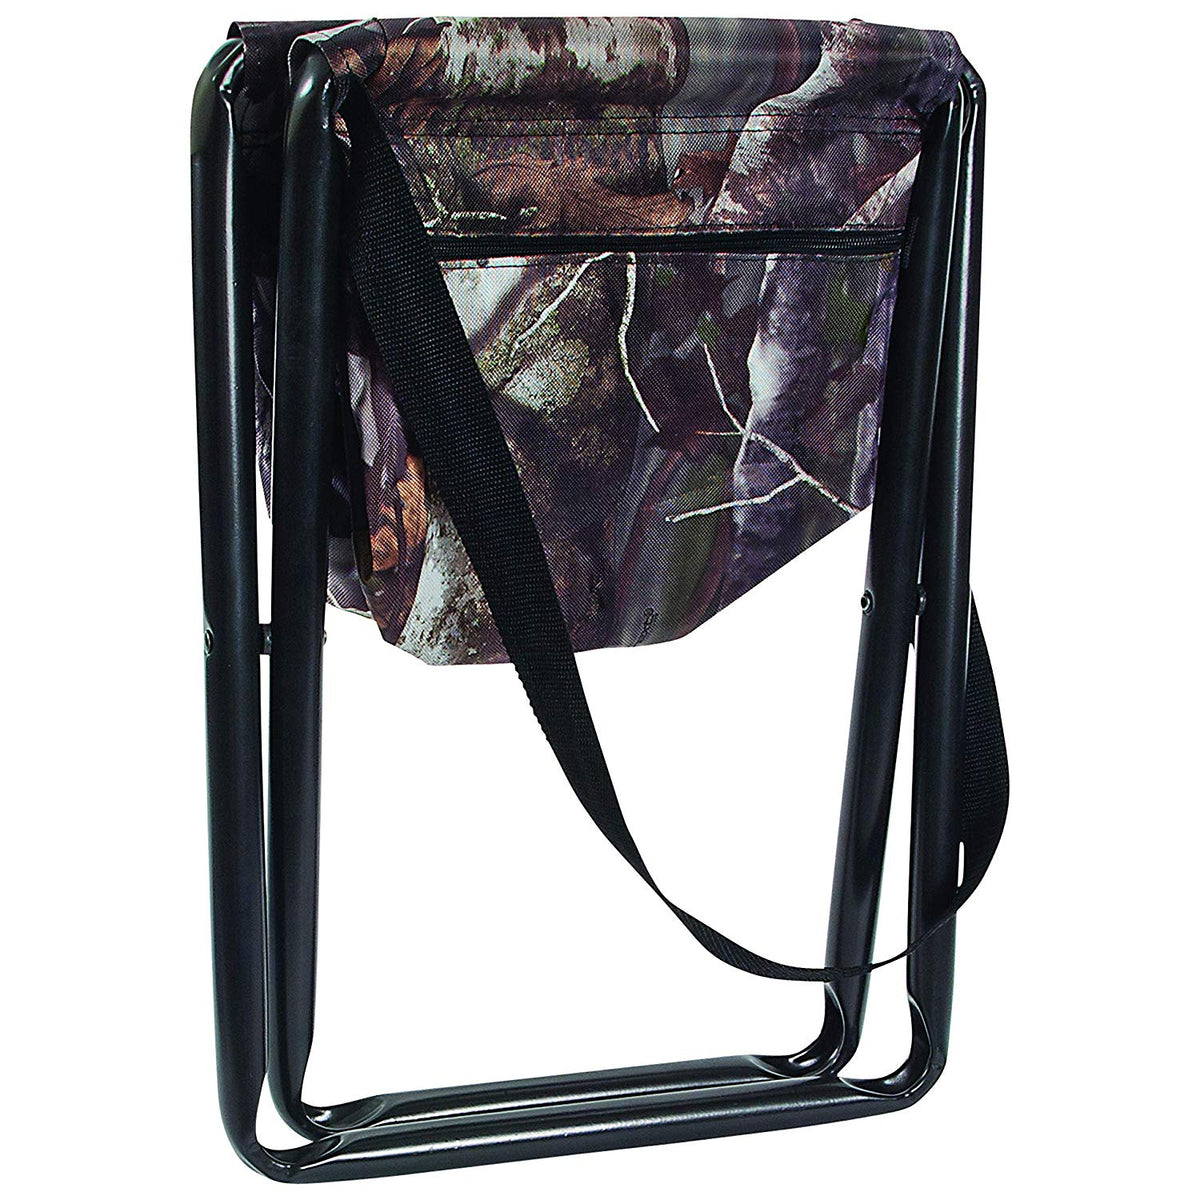 Allen 5853 Collapsible Folding Stool with Tripod Legs